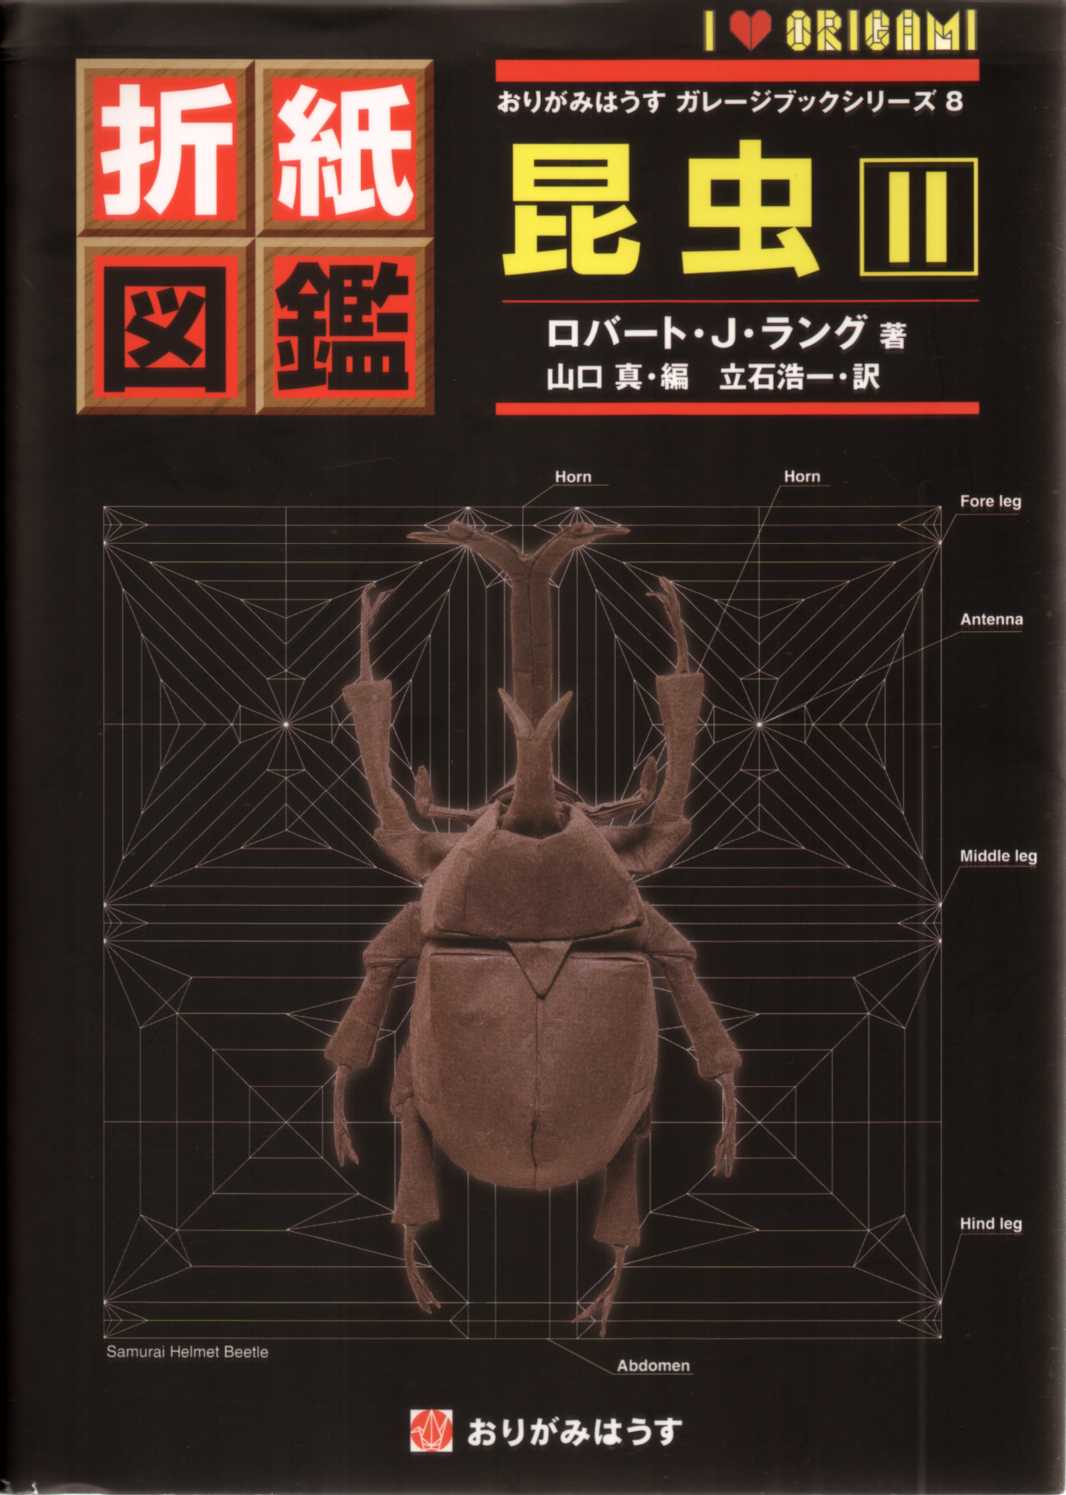 Origami Insects II / 折紙図鑑　昆虫・2 : page 47.